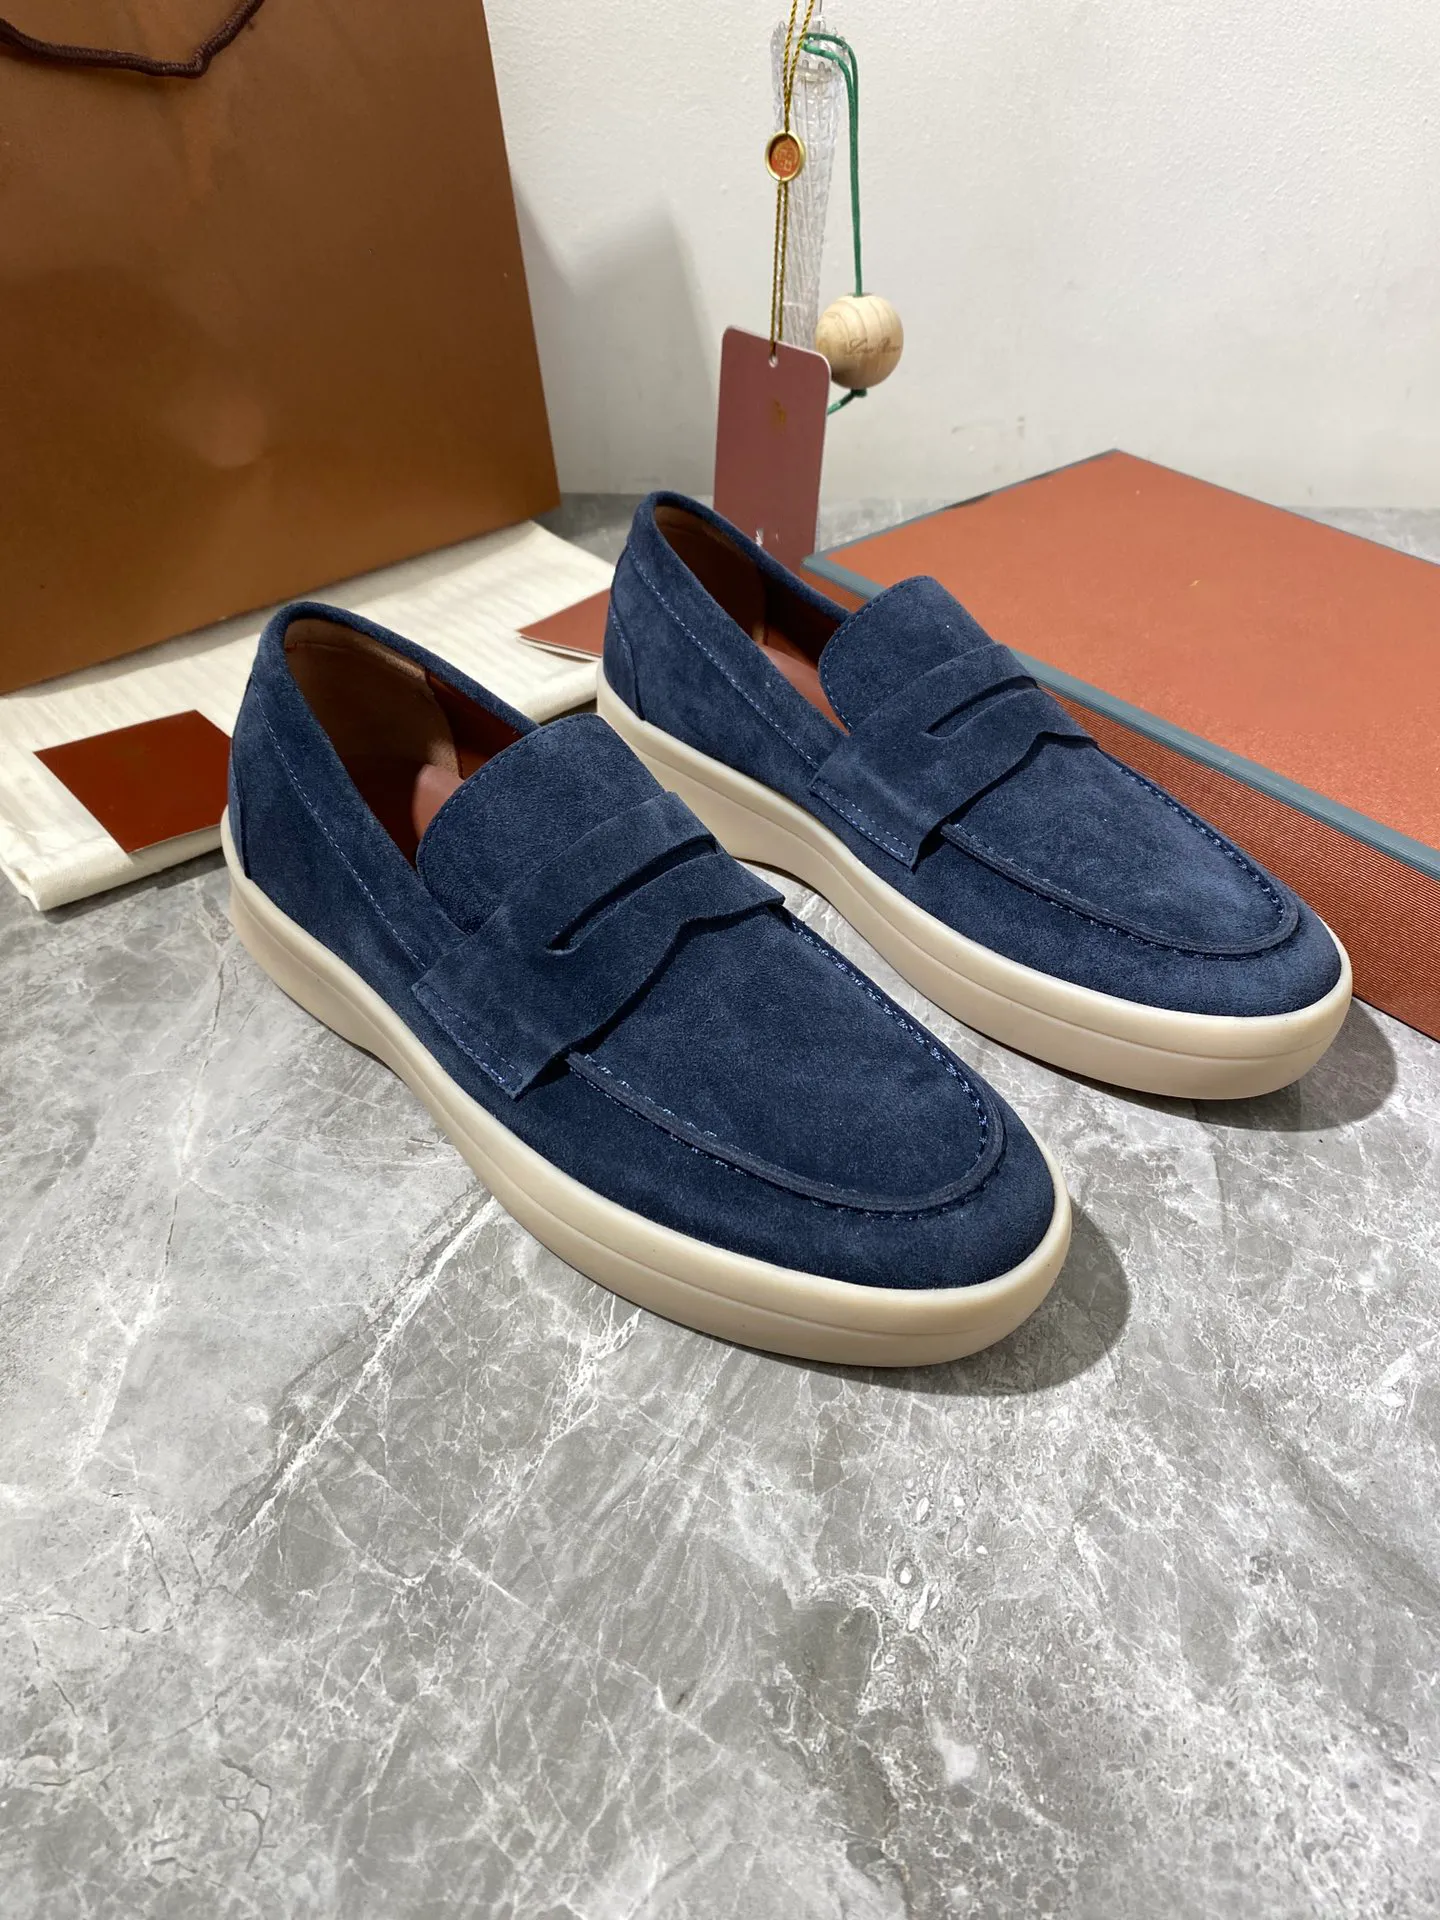 Ultimate Walk Loafers Men Summer Sticked Charms Walk LP Loafer Designer Casual Shoes Suede Moccasins Sneakers Loafers Loropiana Outdoor Sports Trainers Loro 38-46